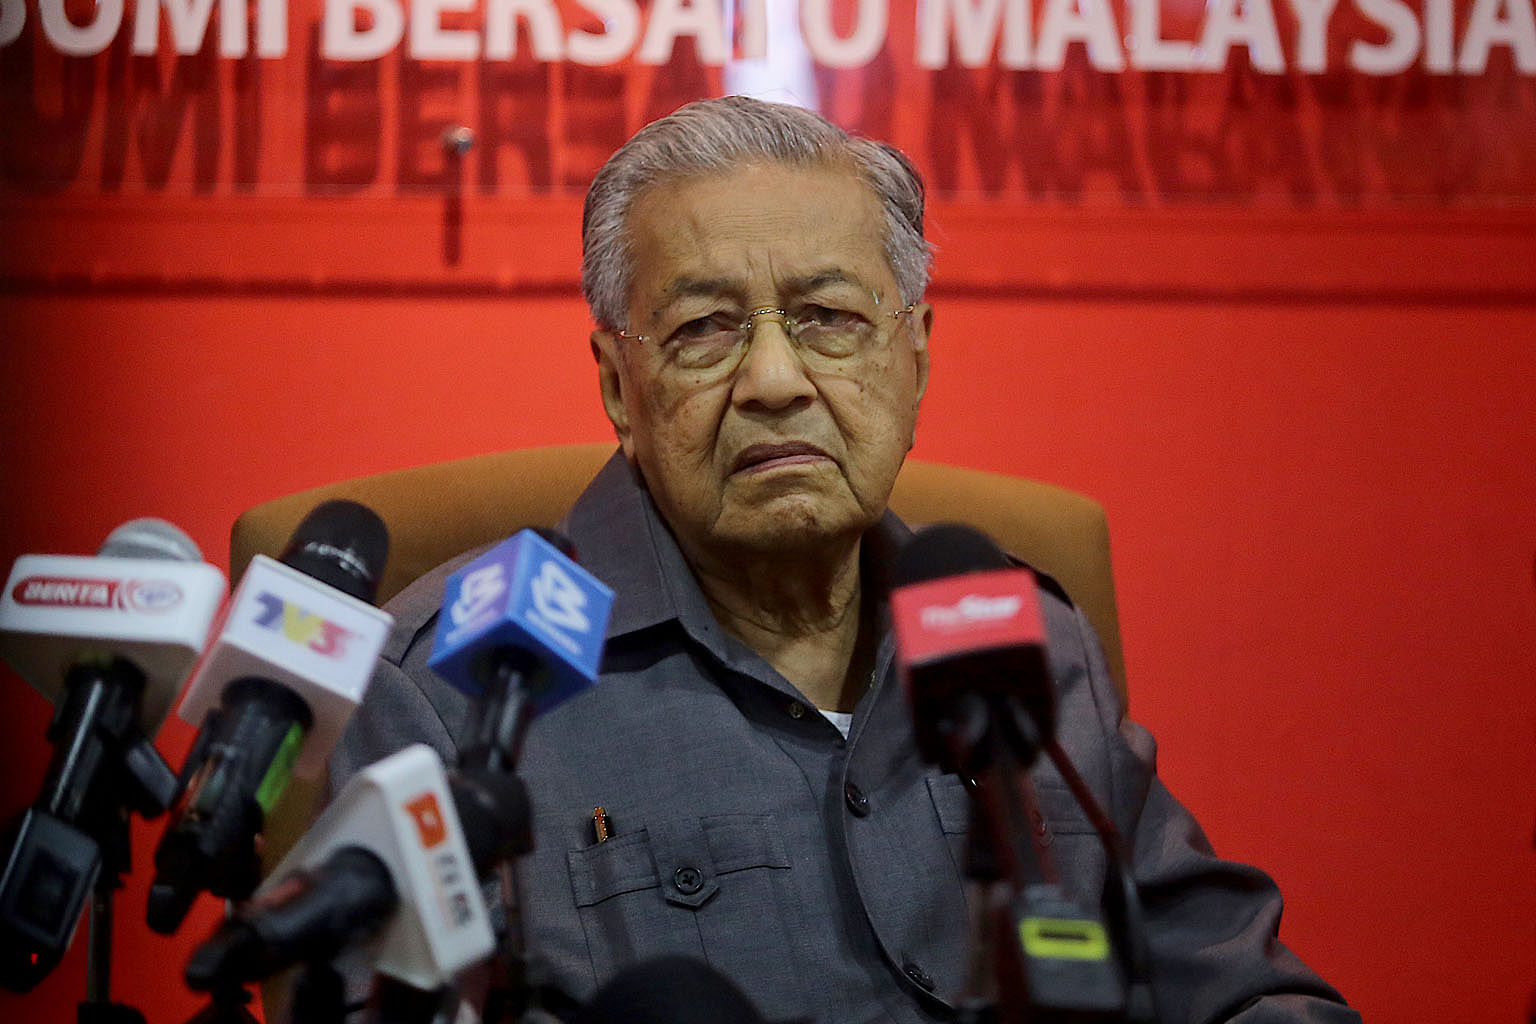 Dr Mahathir Mohamad (left) is trying to deprive incumbent Prime Minister Muhyiddin Yassin of a simple majority in Parliament, while Mr Muhyiddin needs to increase the number of his MPs to stabilise his administration. PHOTOS: BERNAMA